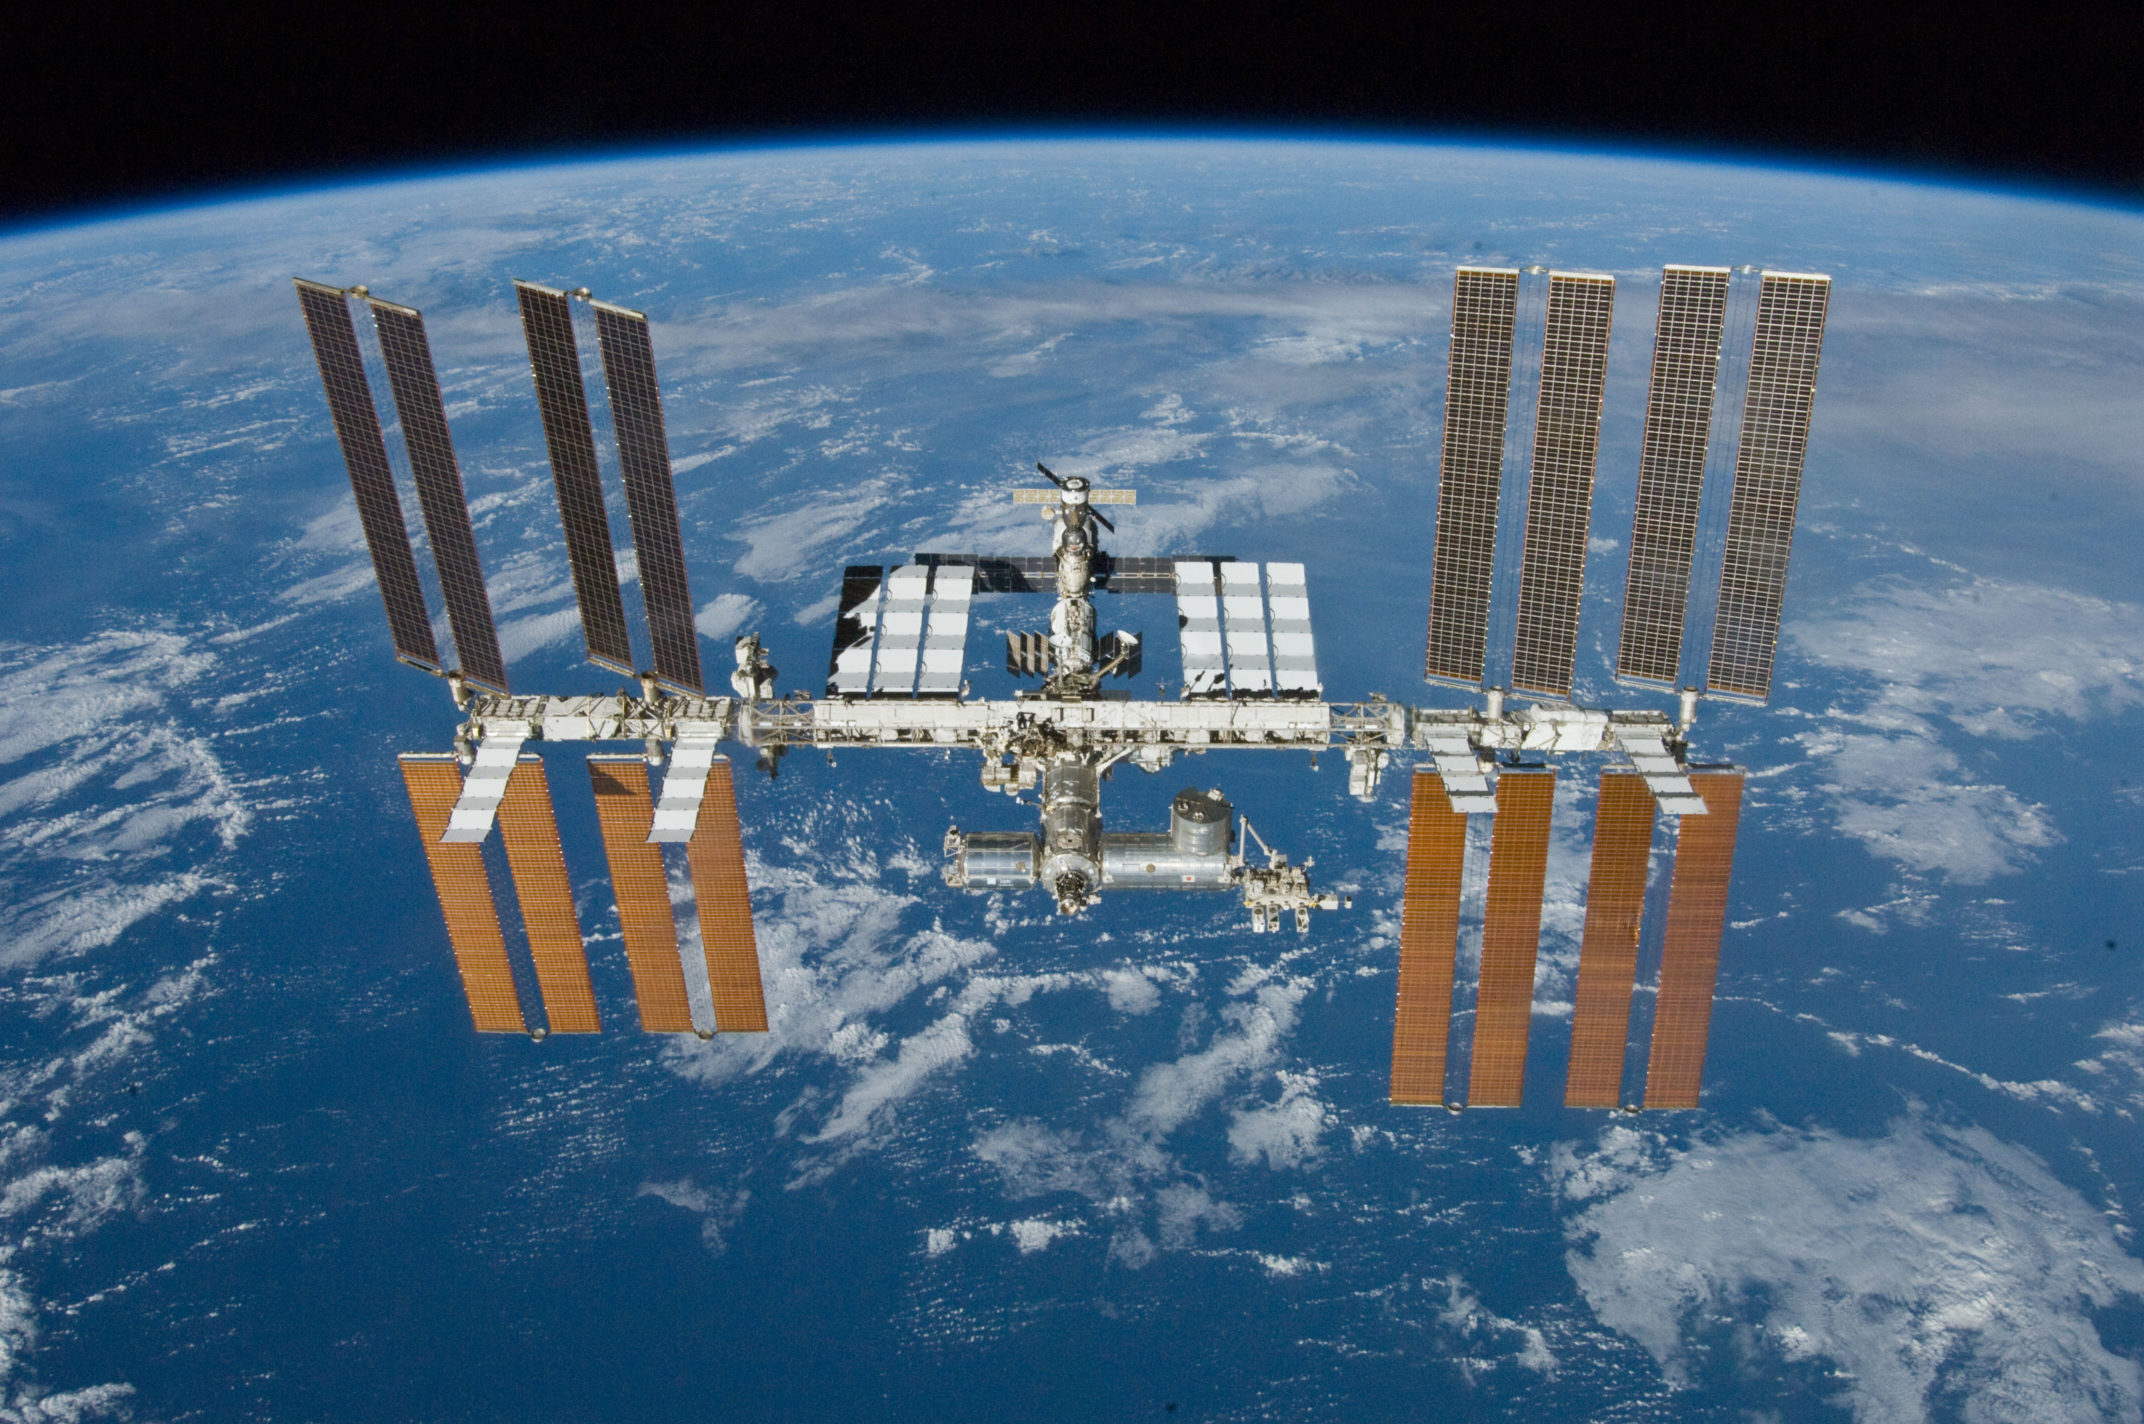 APRS Settings For The ISS (International Space Station)